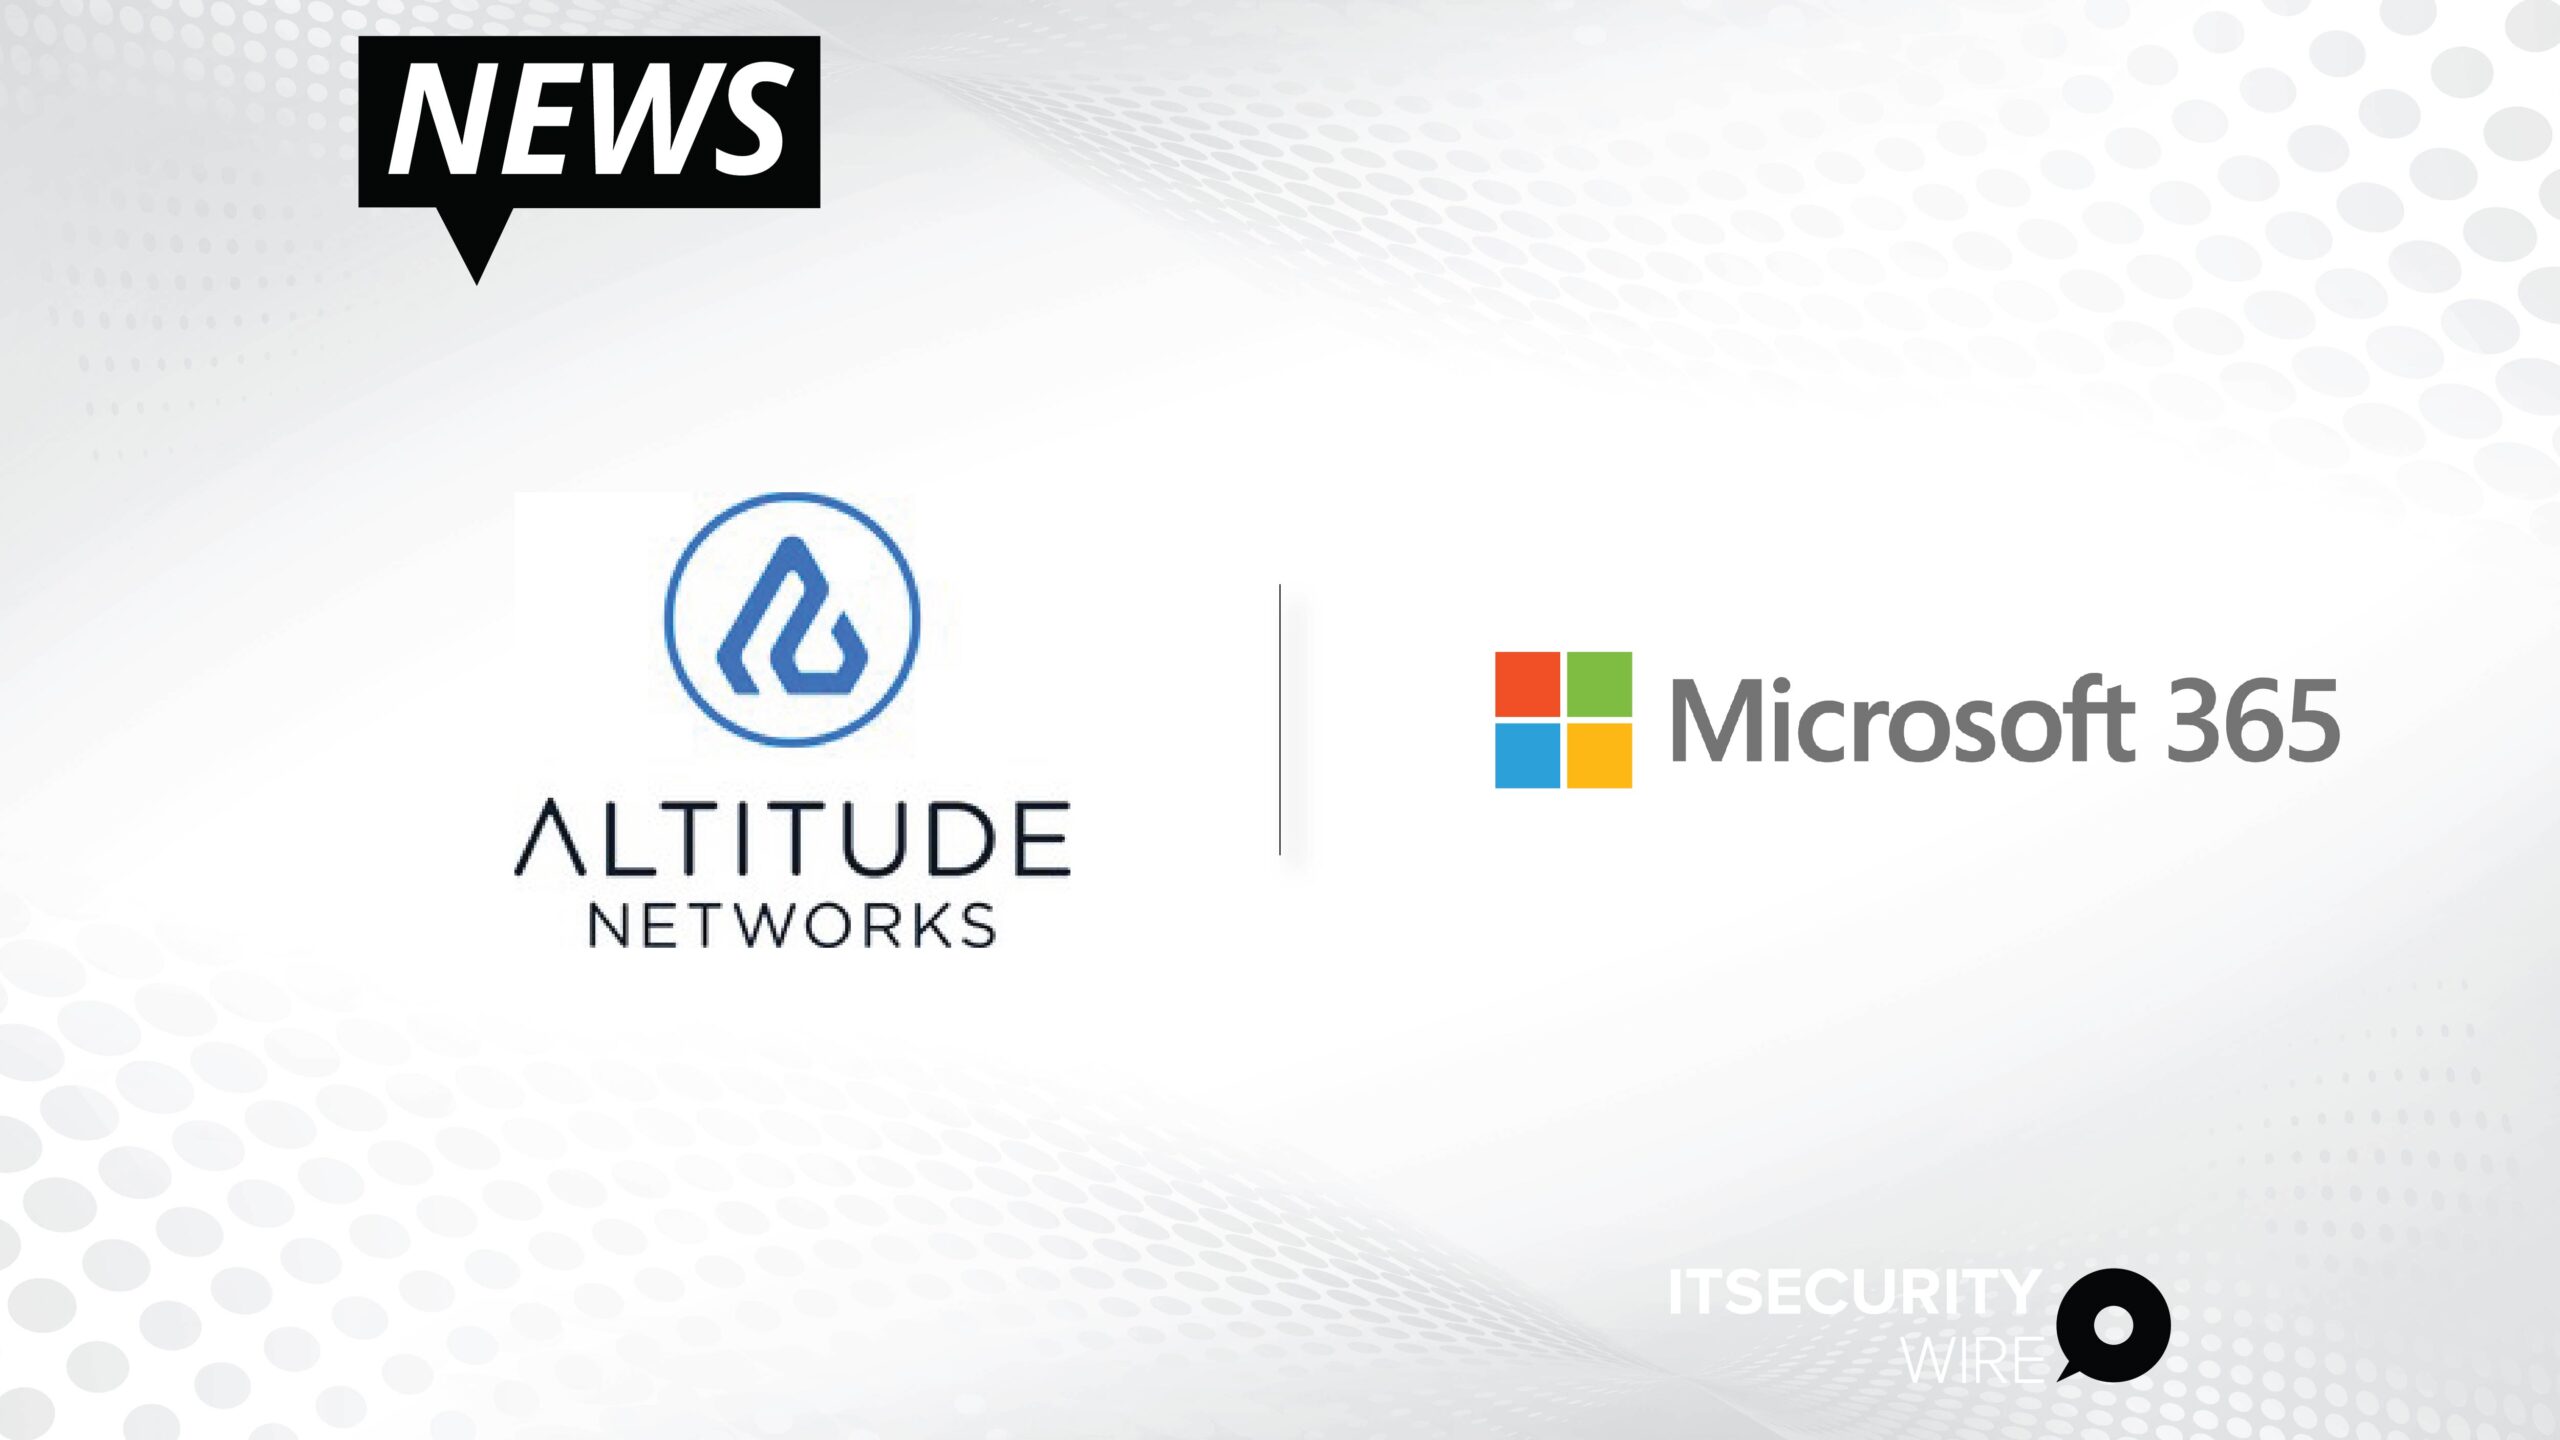 Altitude Networks Announces Microsoft 365 integration for SharePoint and OneDrive providing Cloud Data Protection and Rapid Risks Remediation-01